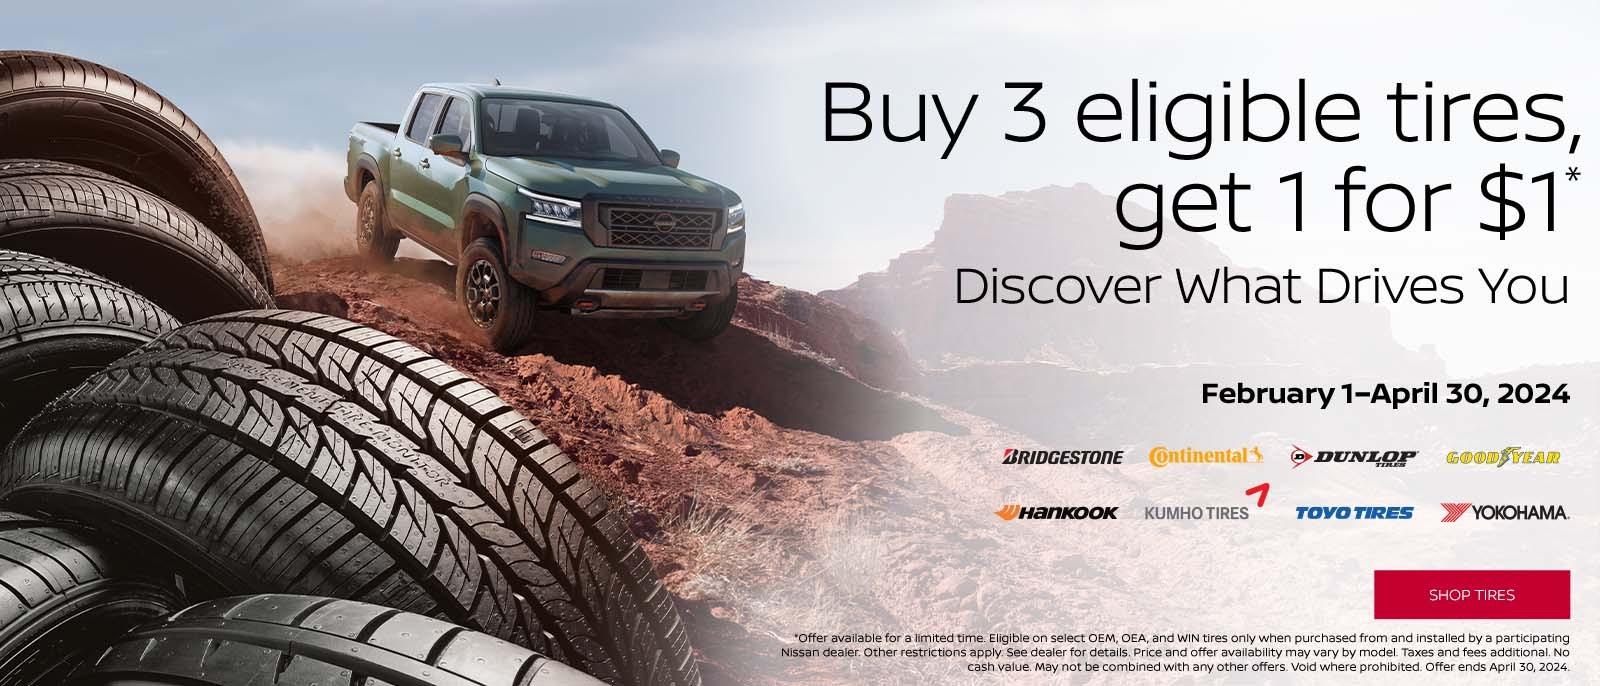 Buy three eligible tires and get the fourth for just $1!